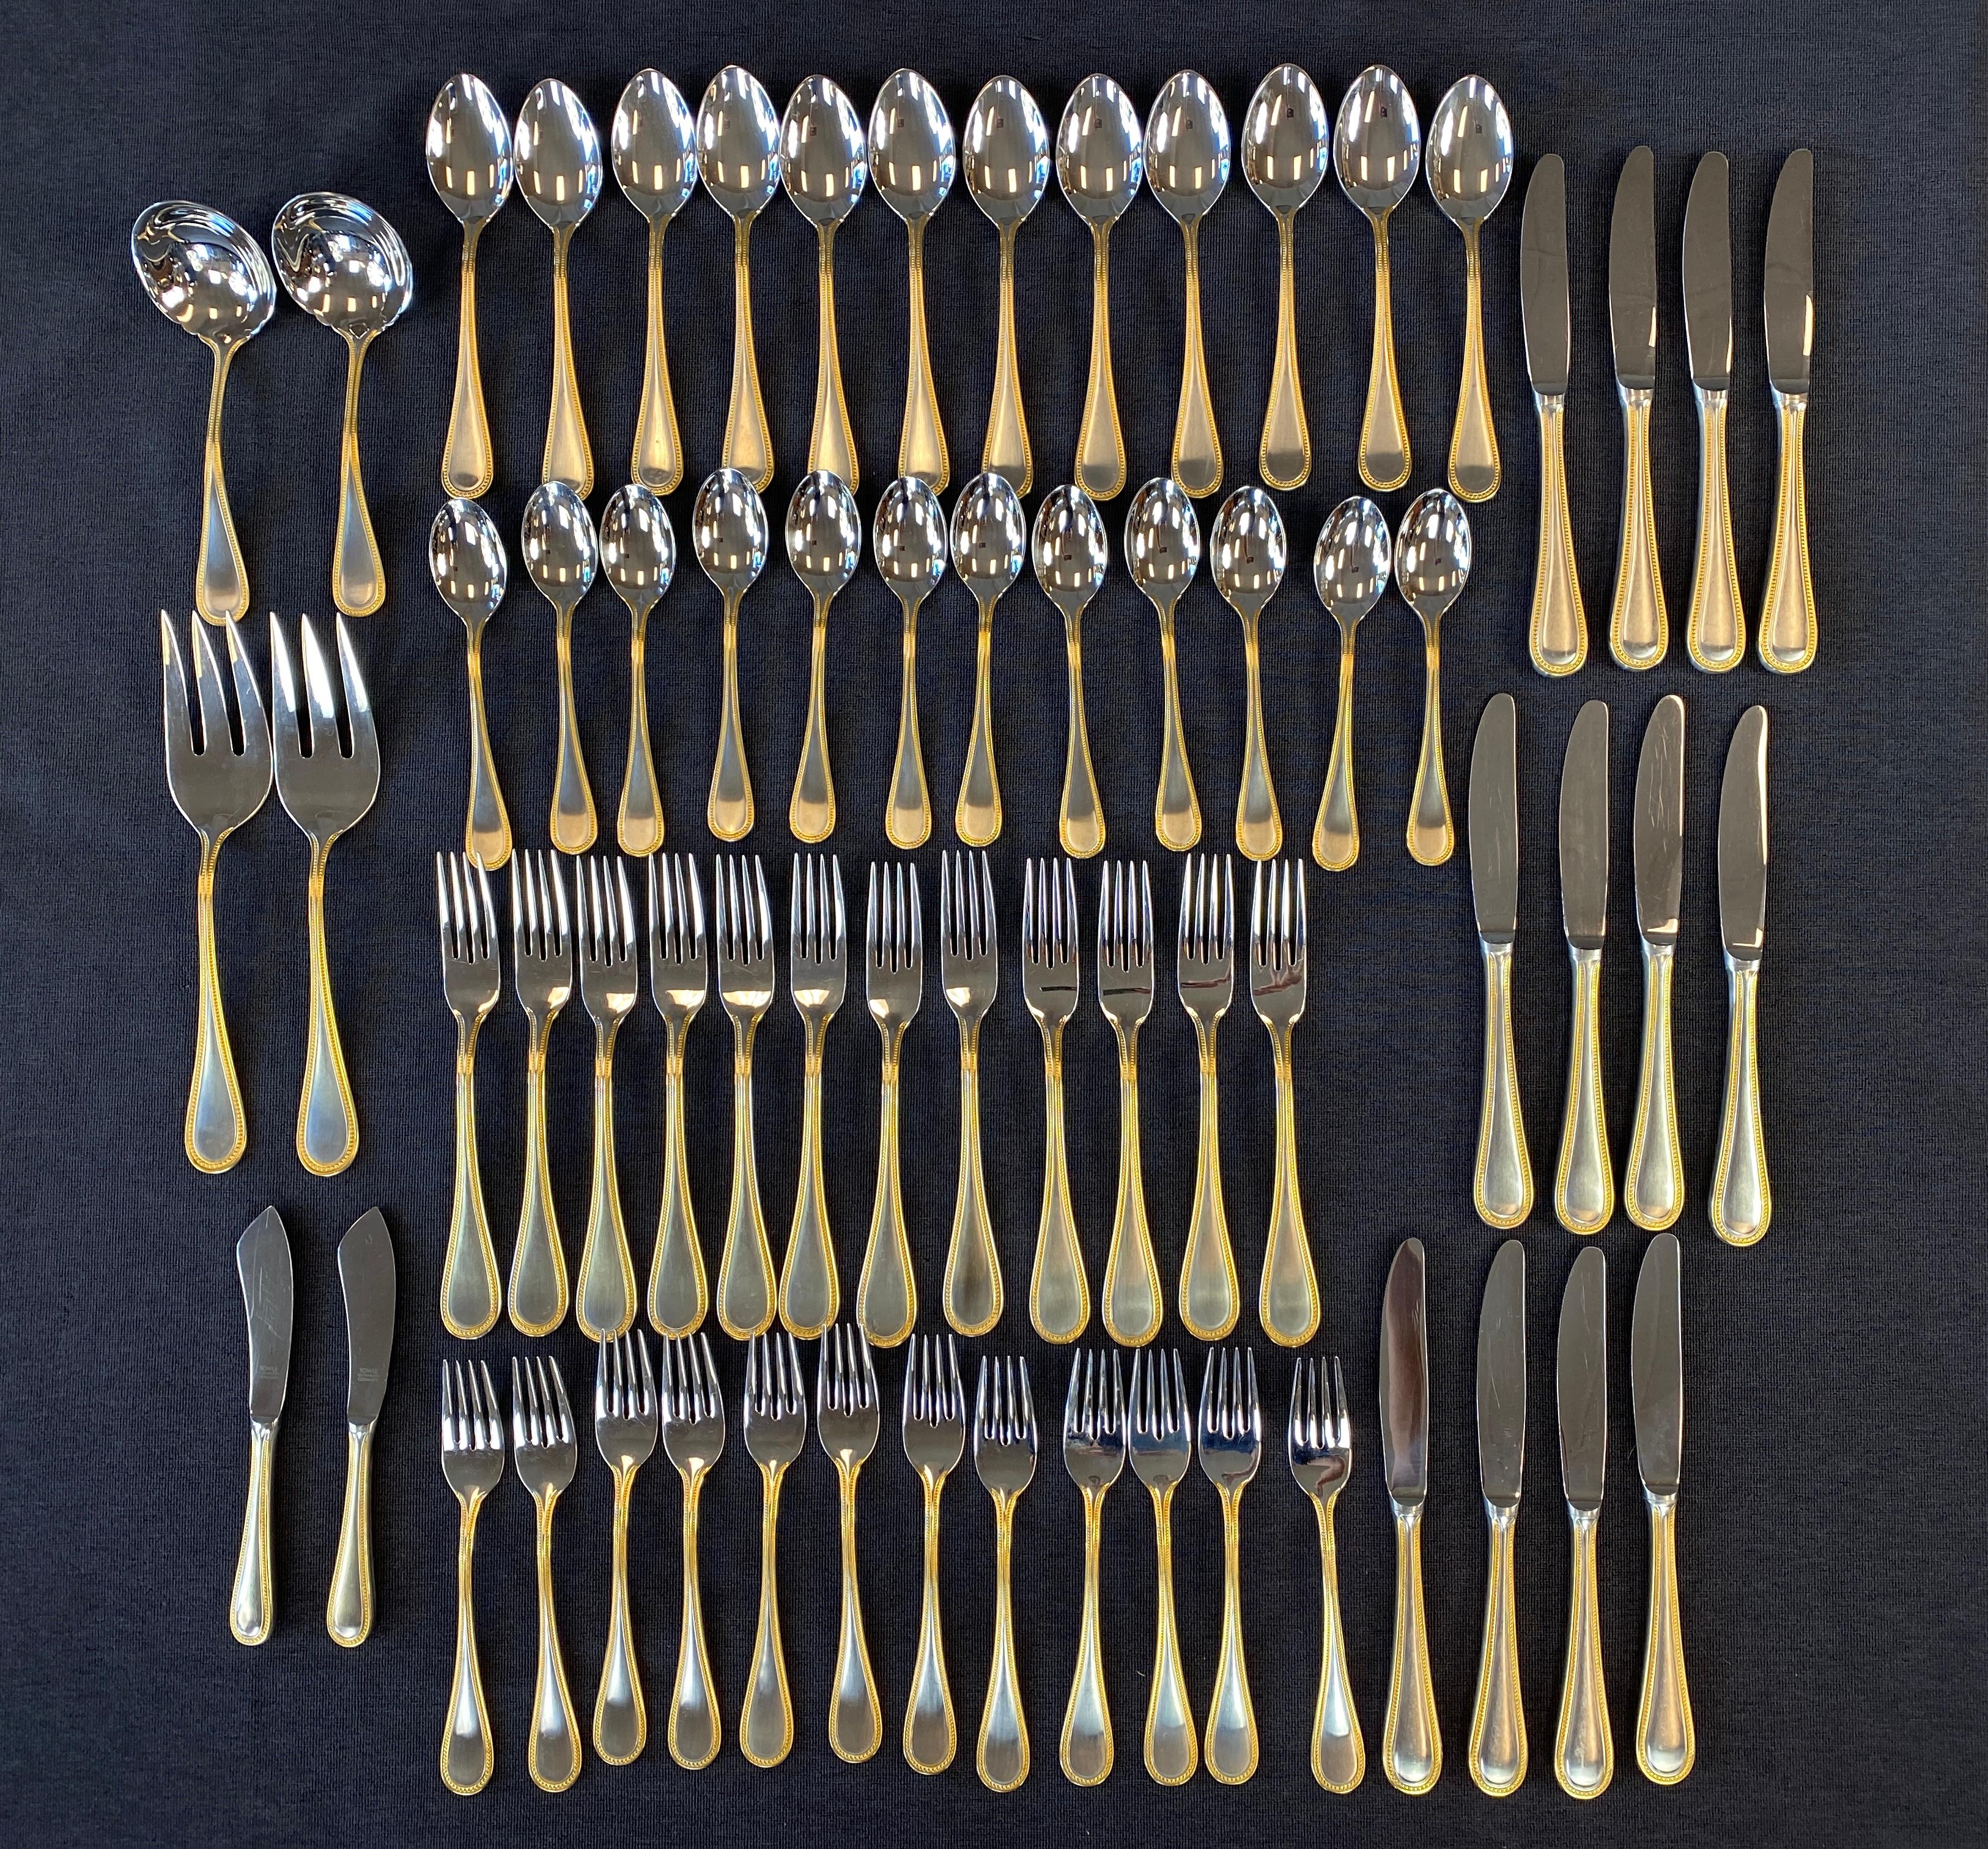 Offered here is a 66 piece set of beaded antique gold by Towle silver 18/8 stainless steel service for 12
German made, circa 1979. Originally purchased at 